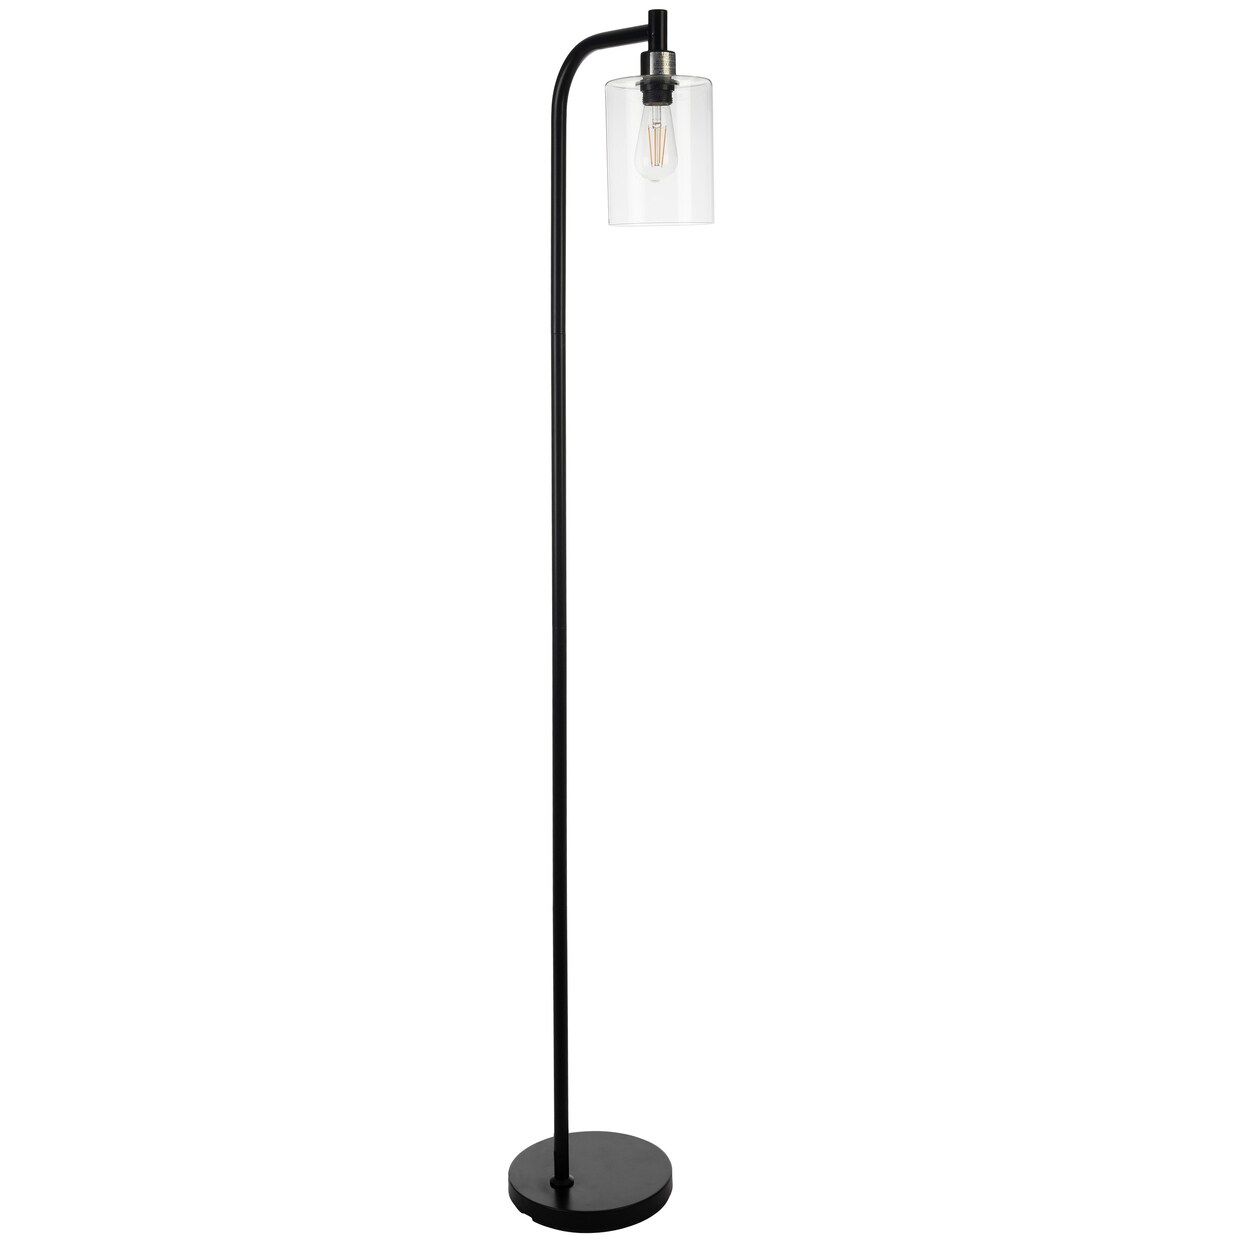 Lavish Home Floor Lamp Room Decor 65in Tall Modern Floor Lamp with Glass Shade and LED Bulb